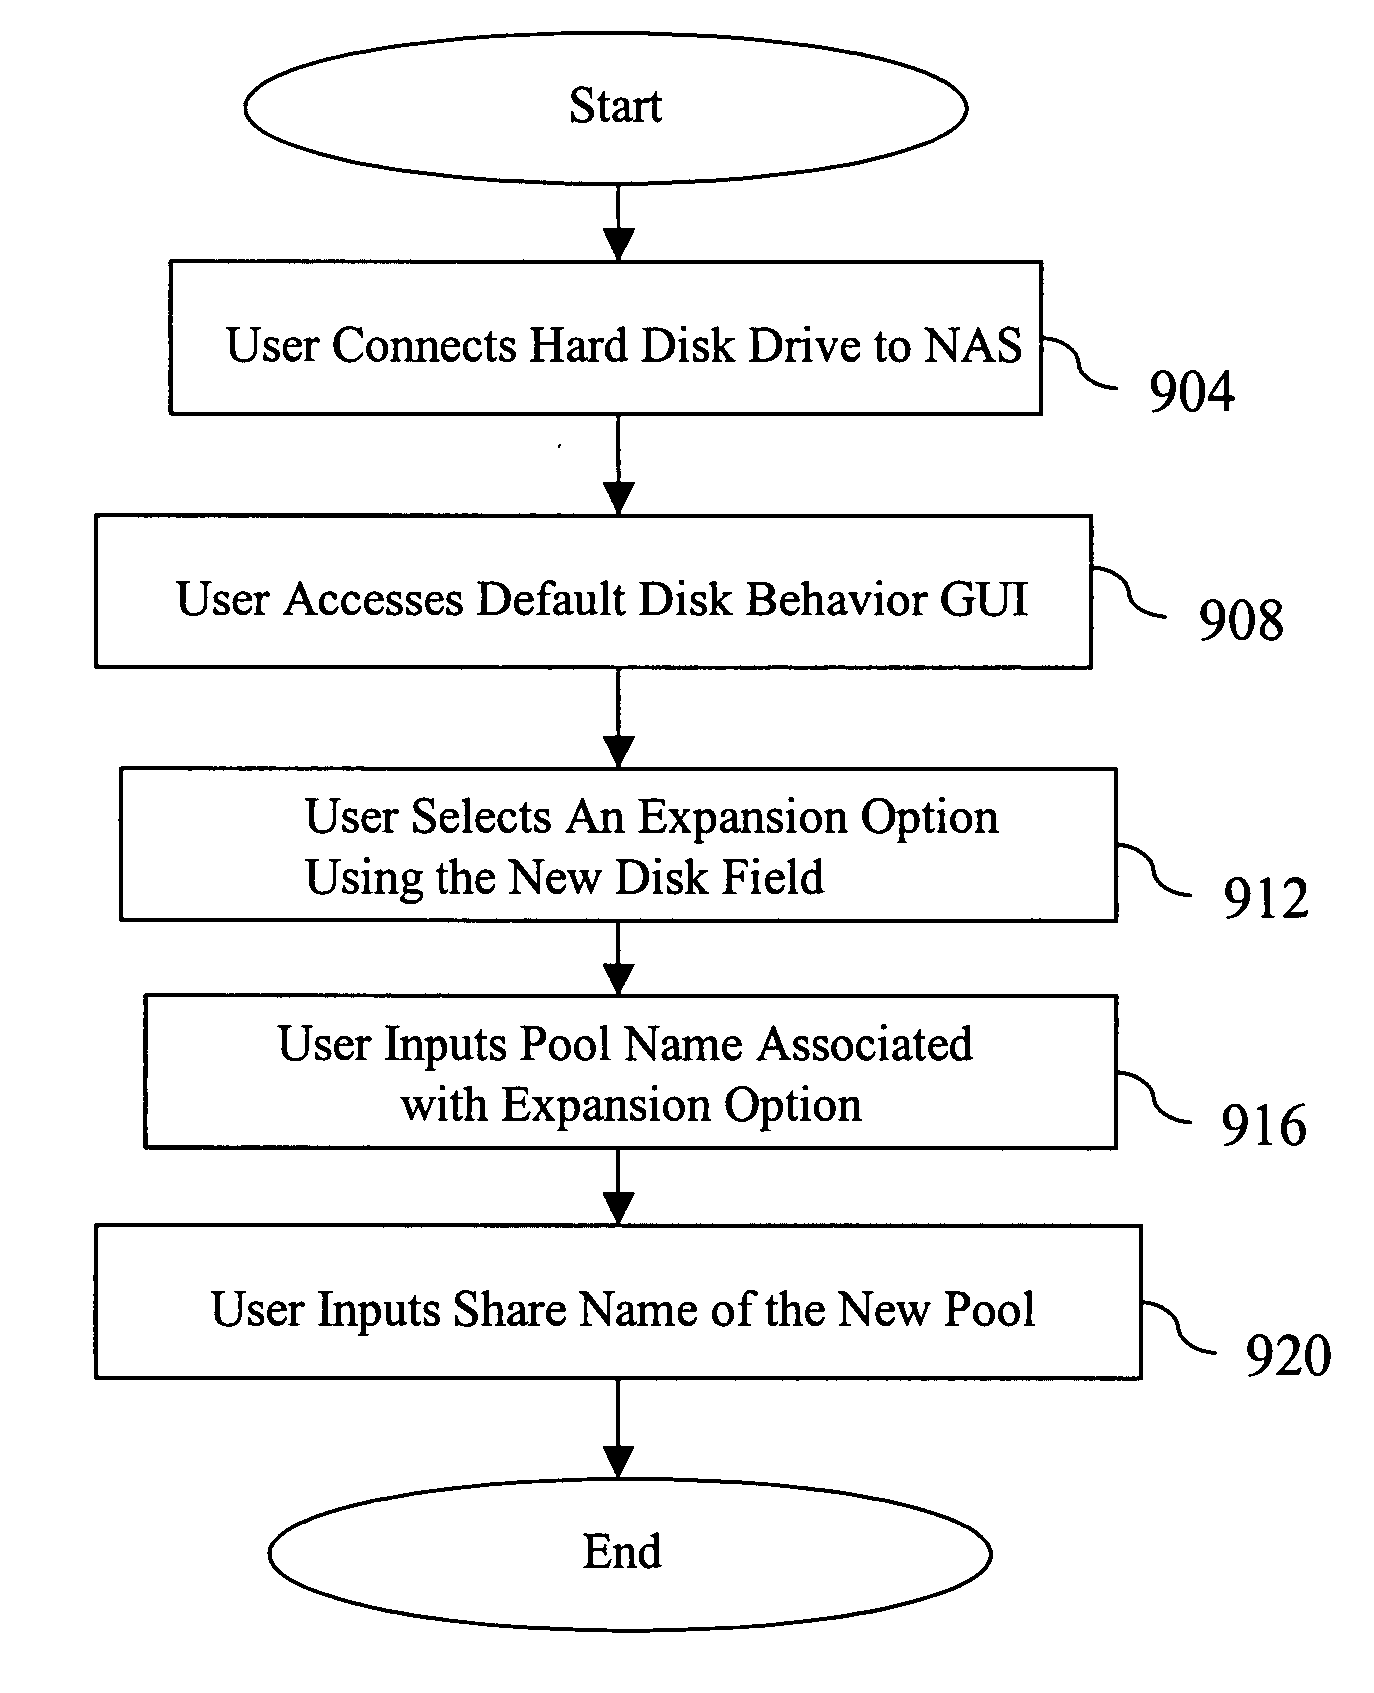 Automatic expansion of hard disk drive capacity in a storage device